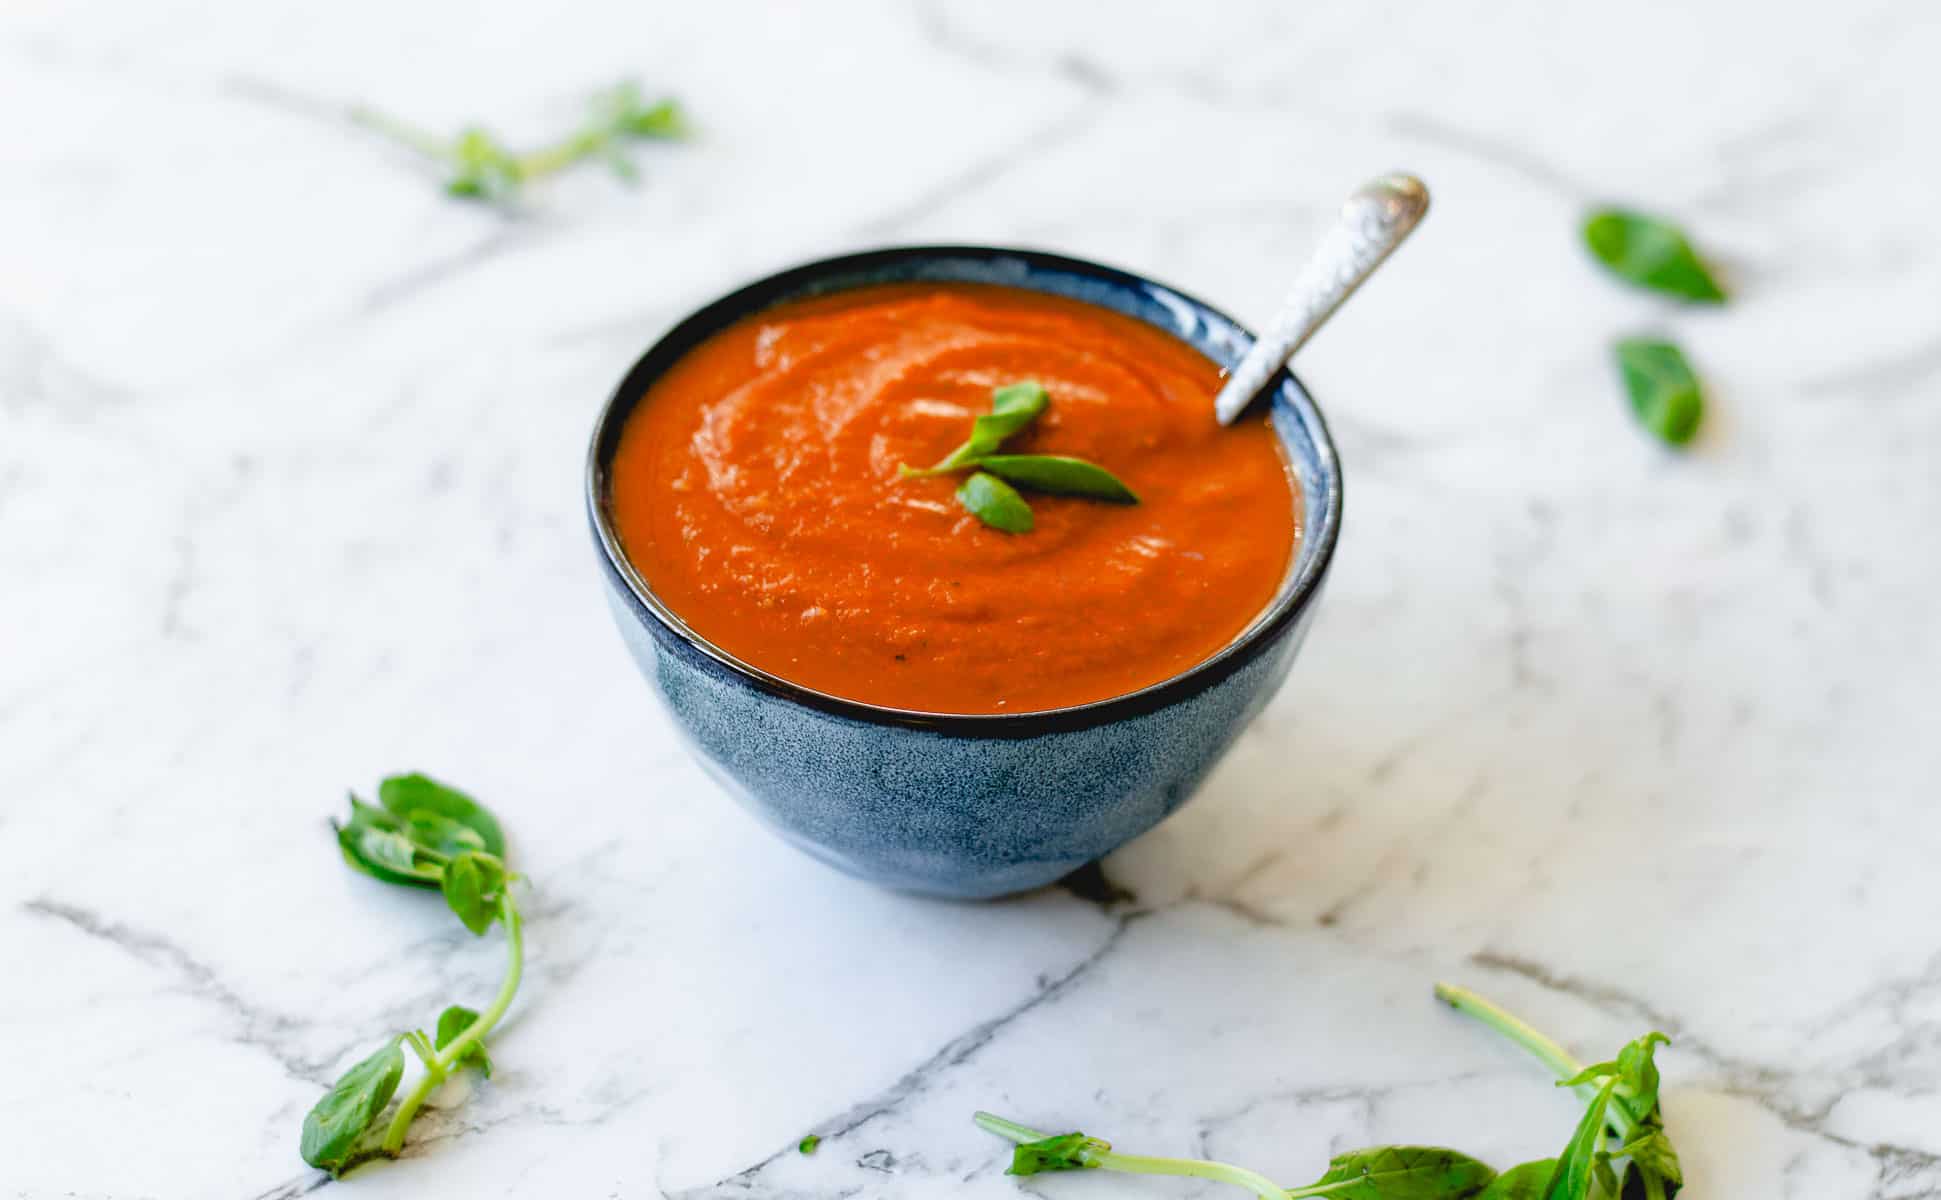 Tomato soup in blue bowl with fresh basil.